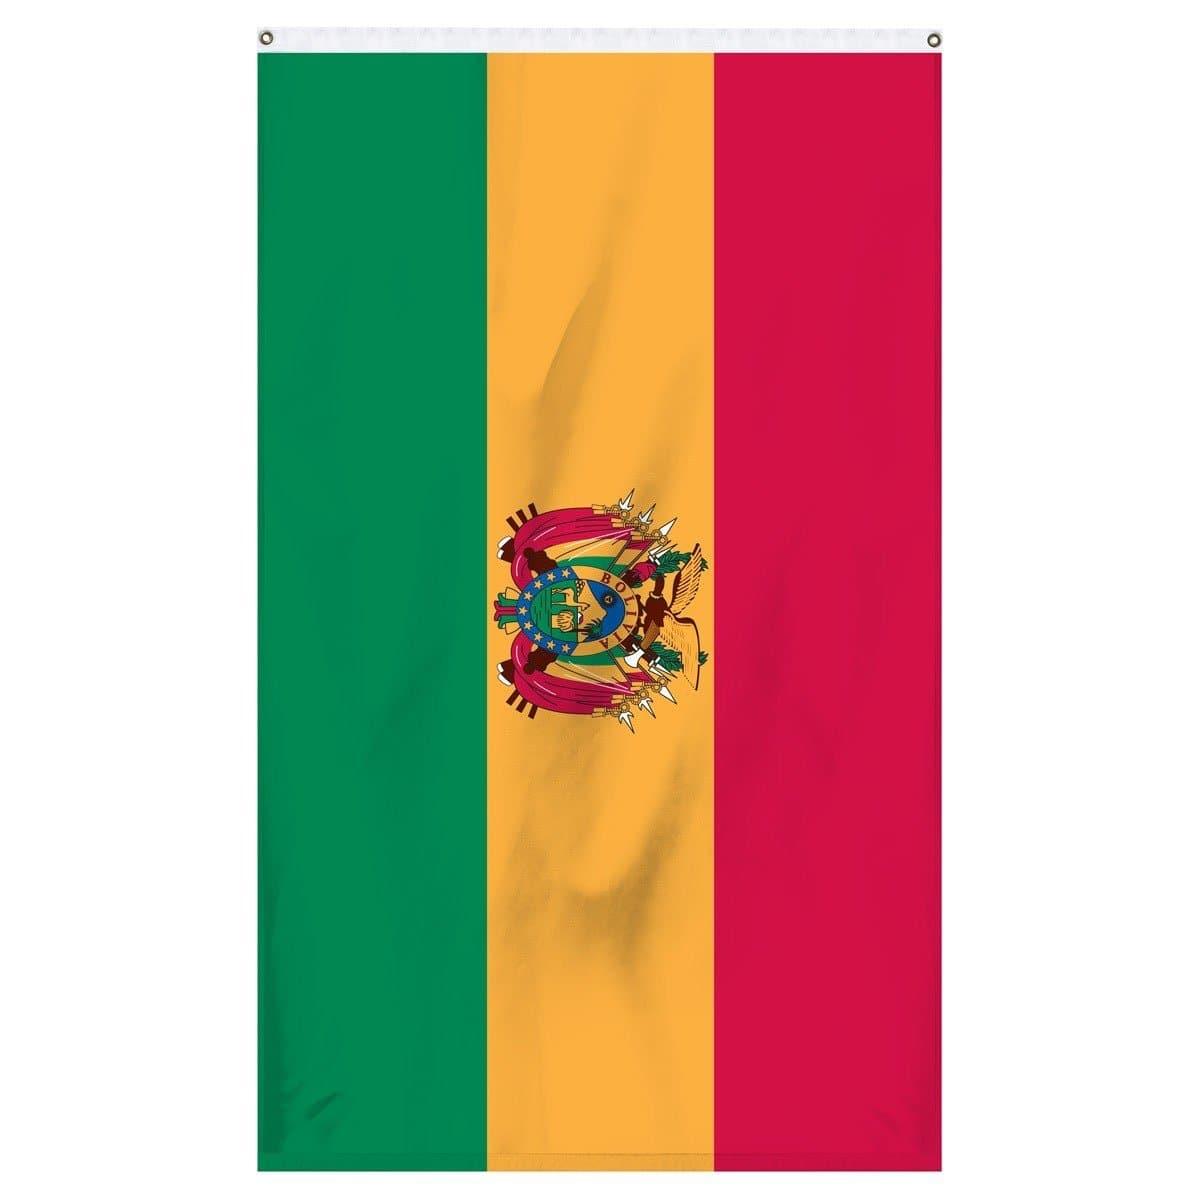 Bolivia international flag for sale to fly ontop of flag poles